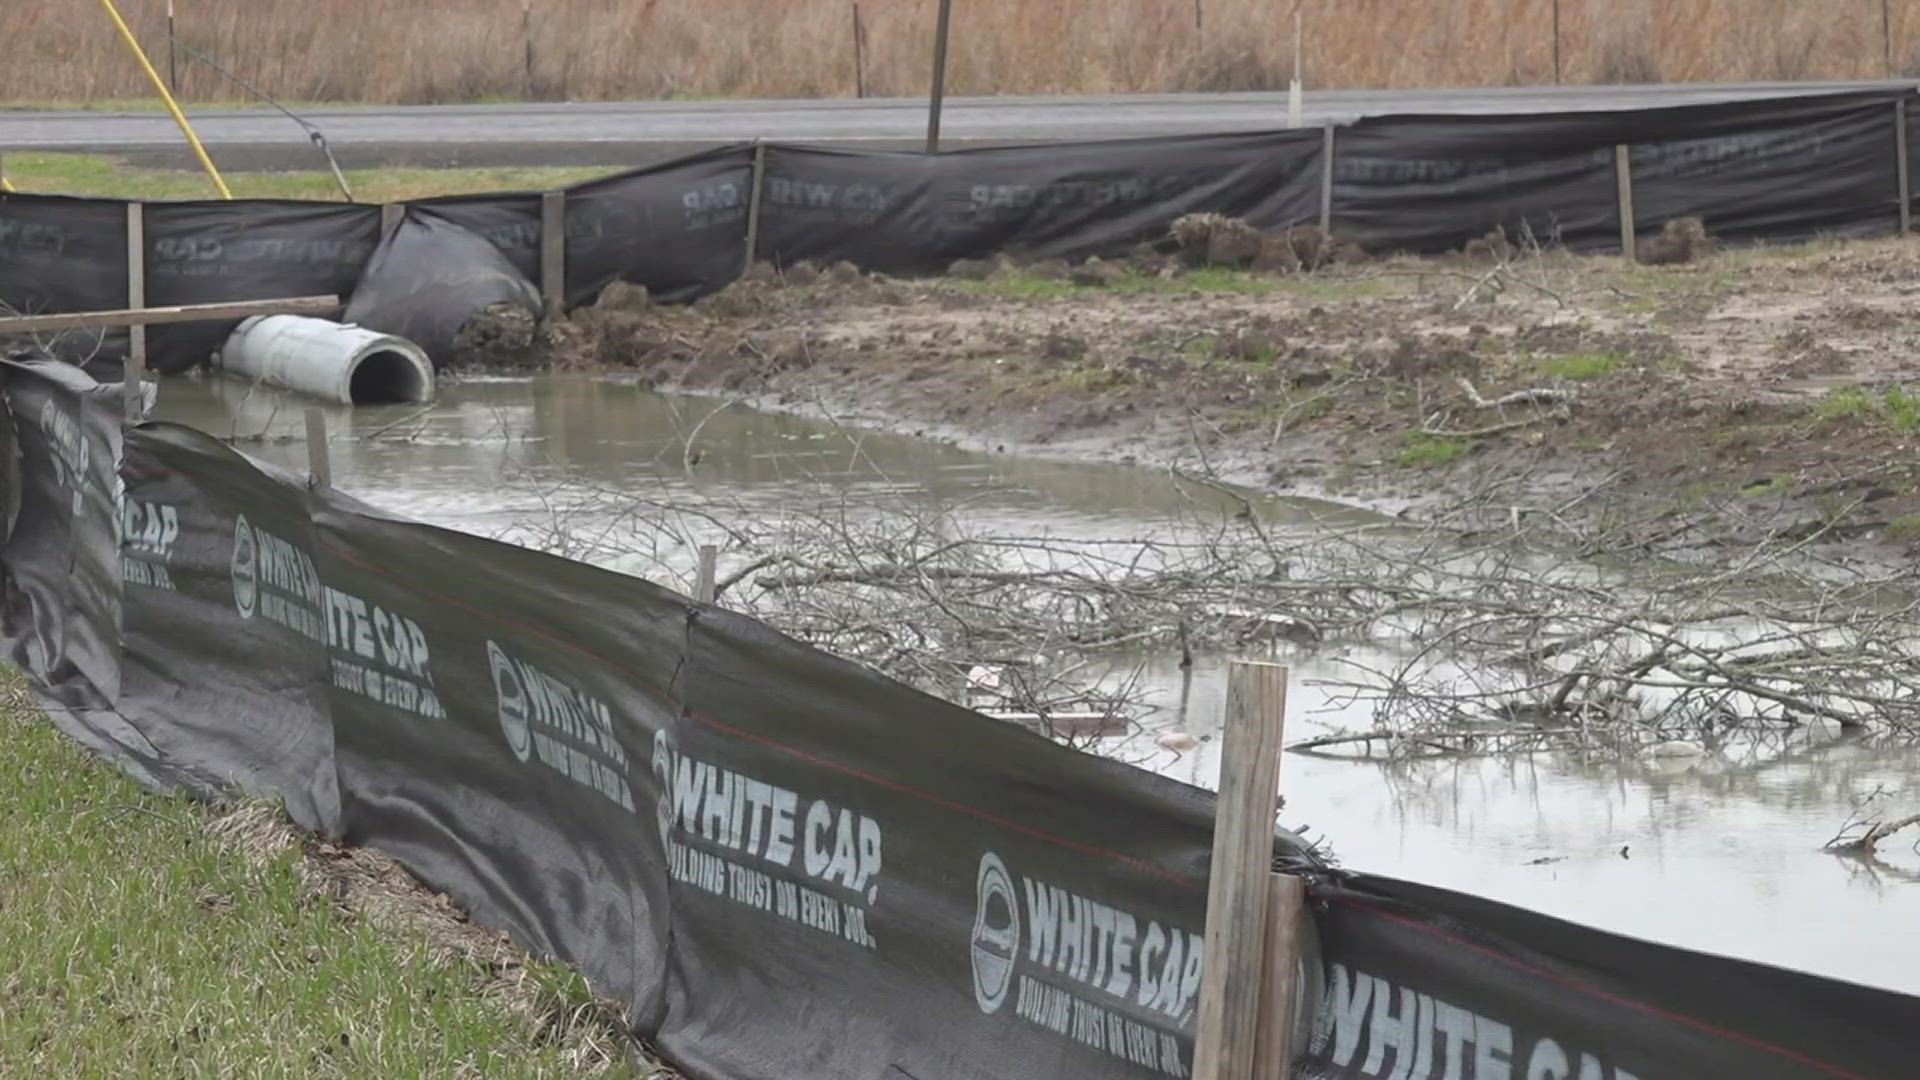 Gene Garcia tells 12news a newly dug ditch could mean flooding for his home and he's addressed the issue multiple times with district officials.